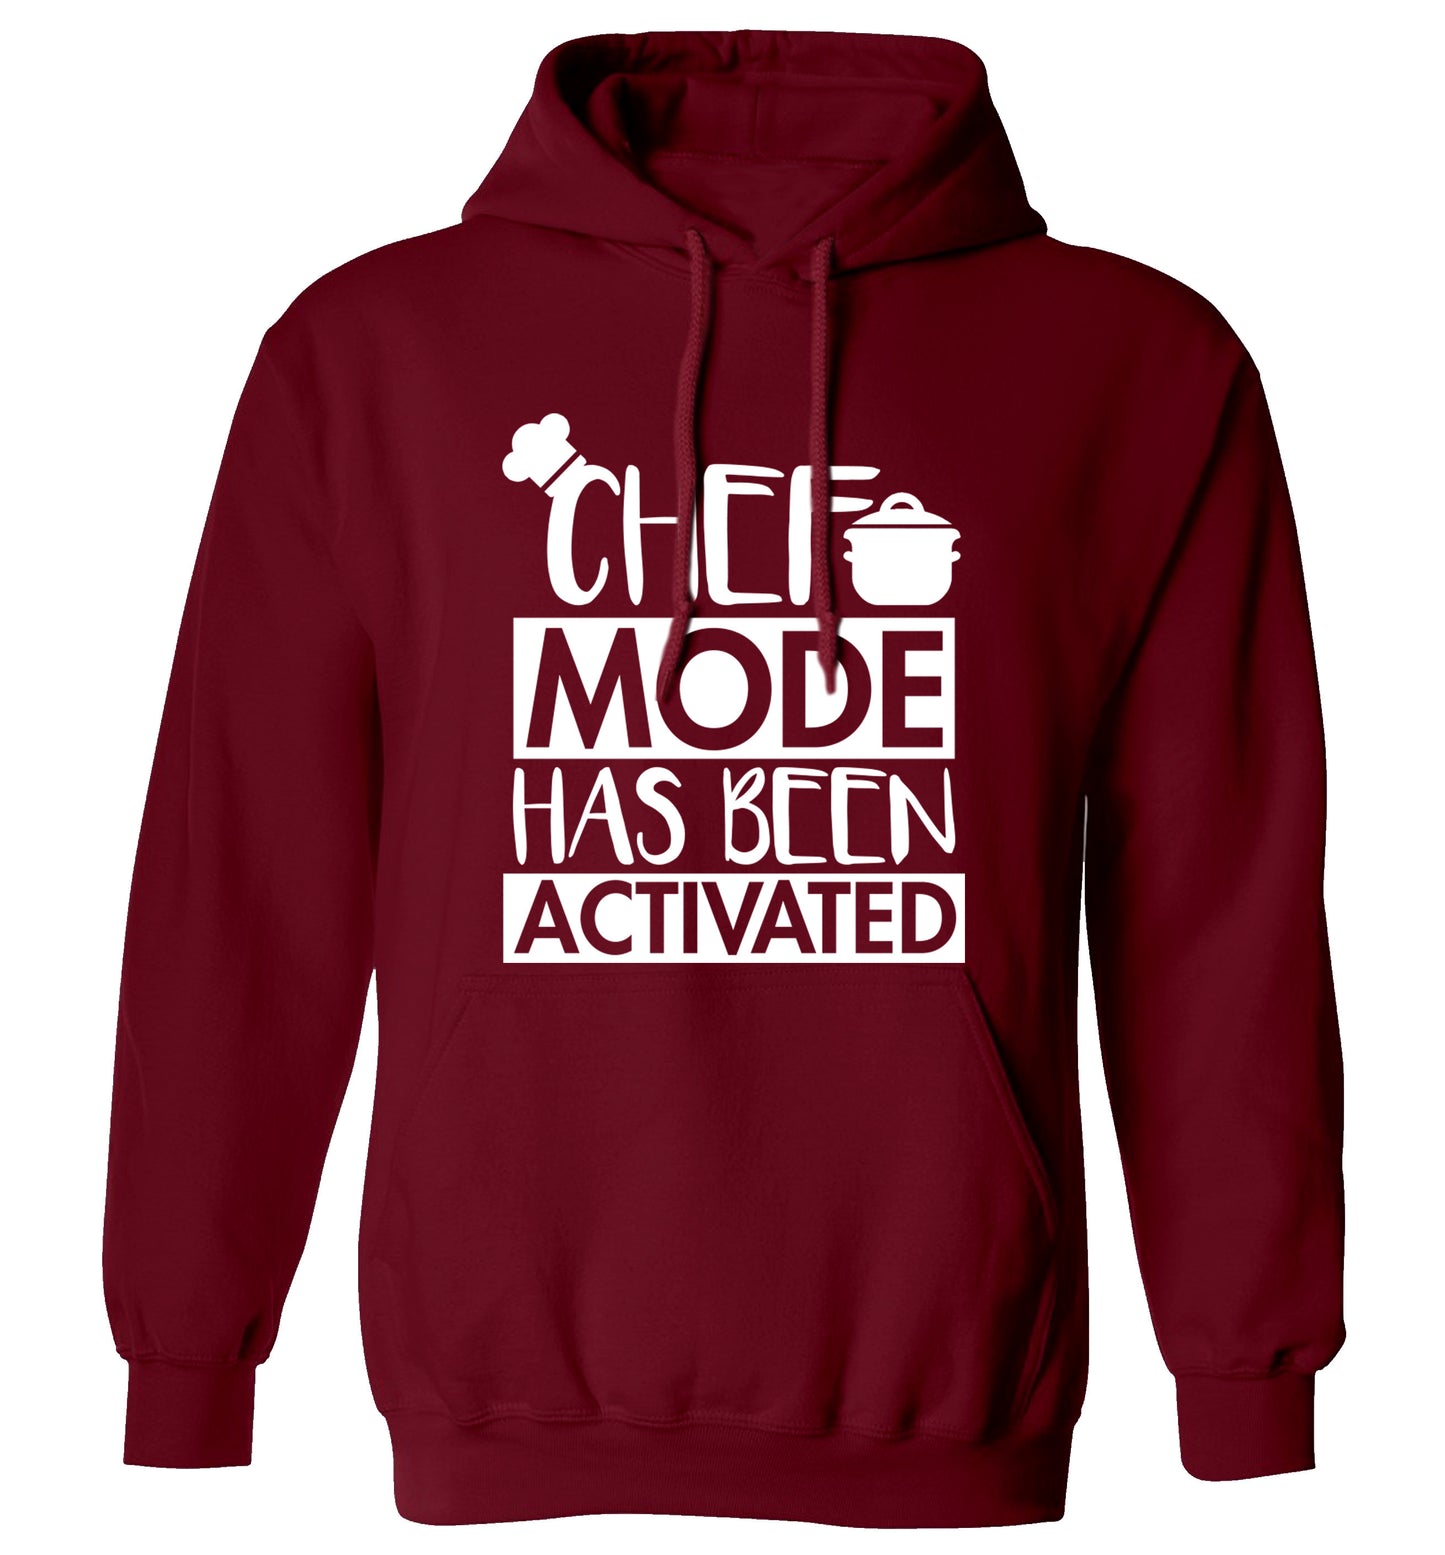 Chef mode has been activated adults unisex maroon hoodie 2XL